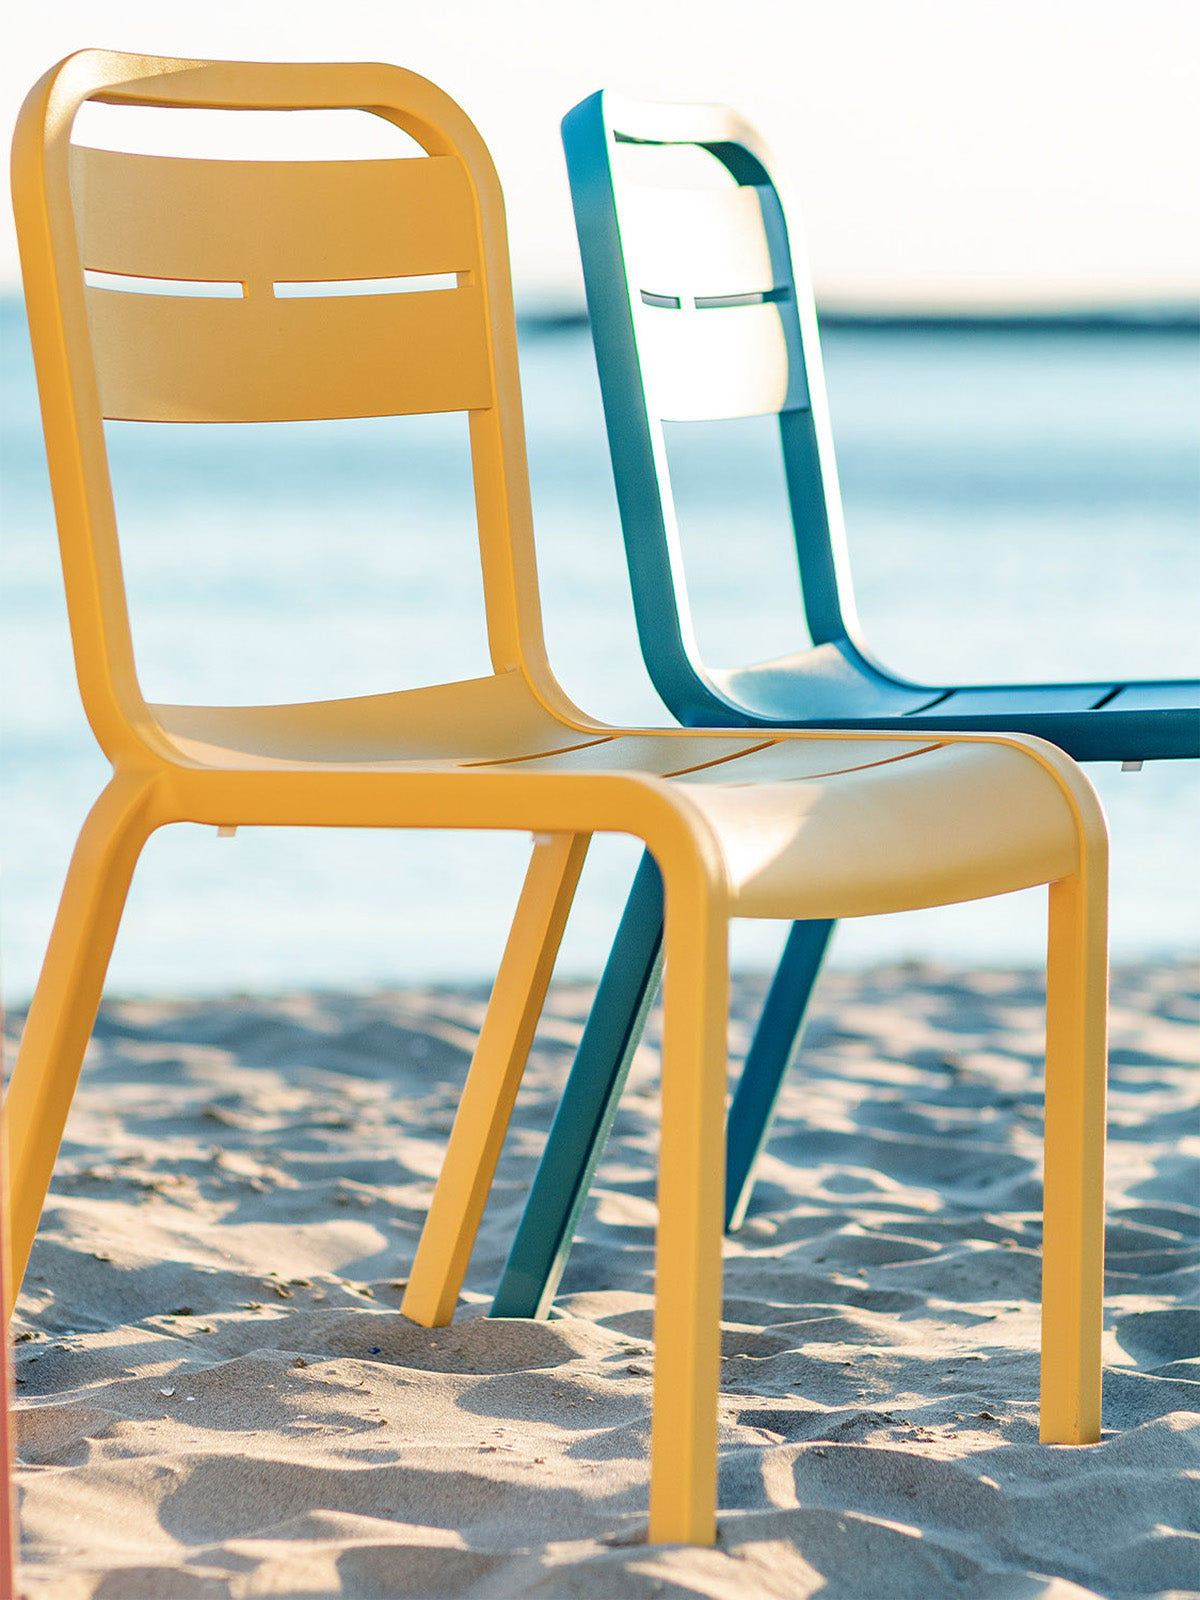 Cannes Chairs sit on the beach by the ocean